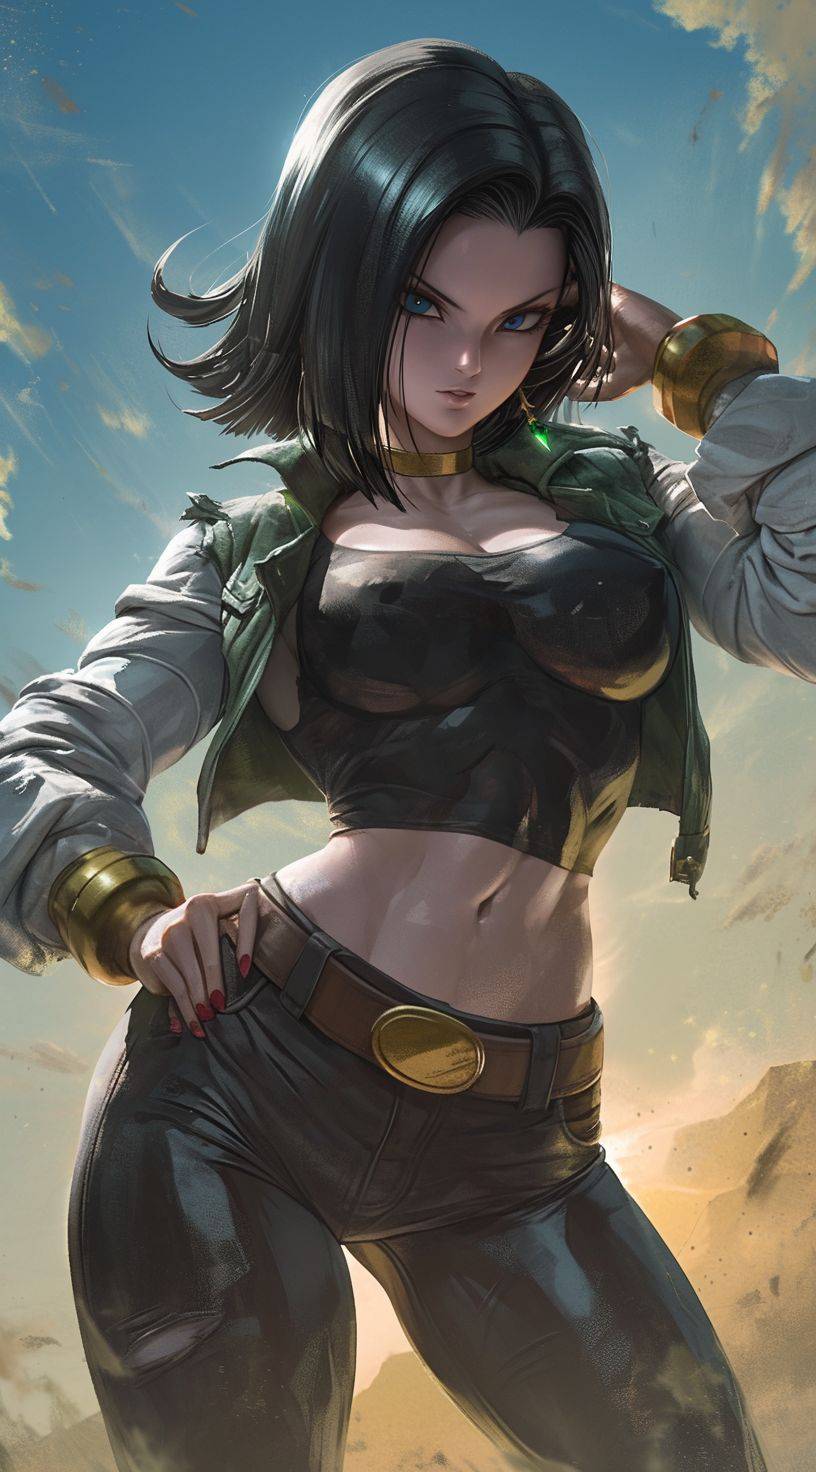 Dragon Ball Super character Android 17, in the style of Hajime Sorayama, textured surface layers, gold and emerald, dynamic outdoor shots, realist detail, expansive skies